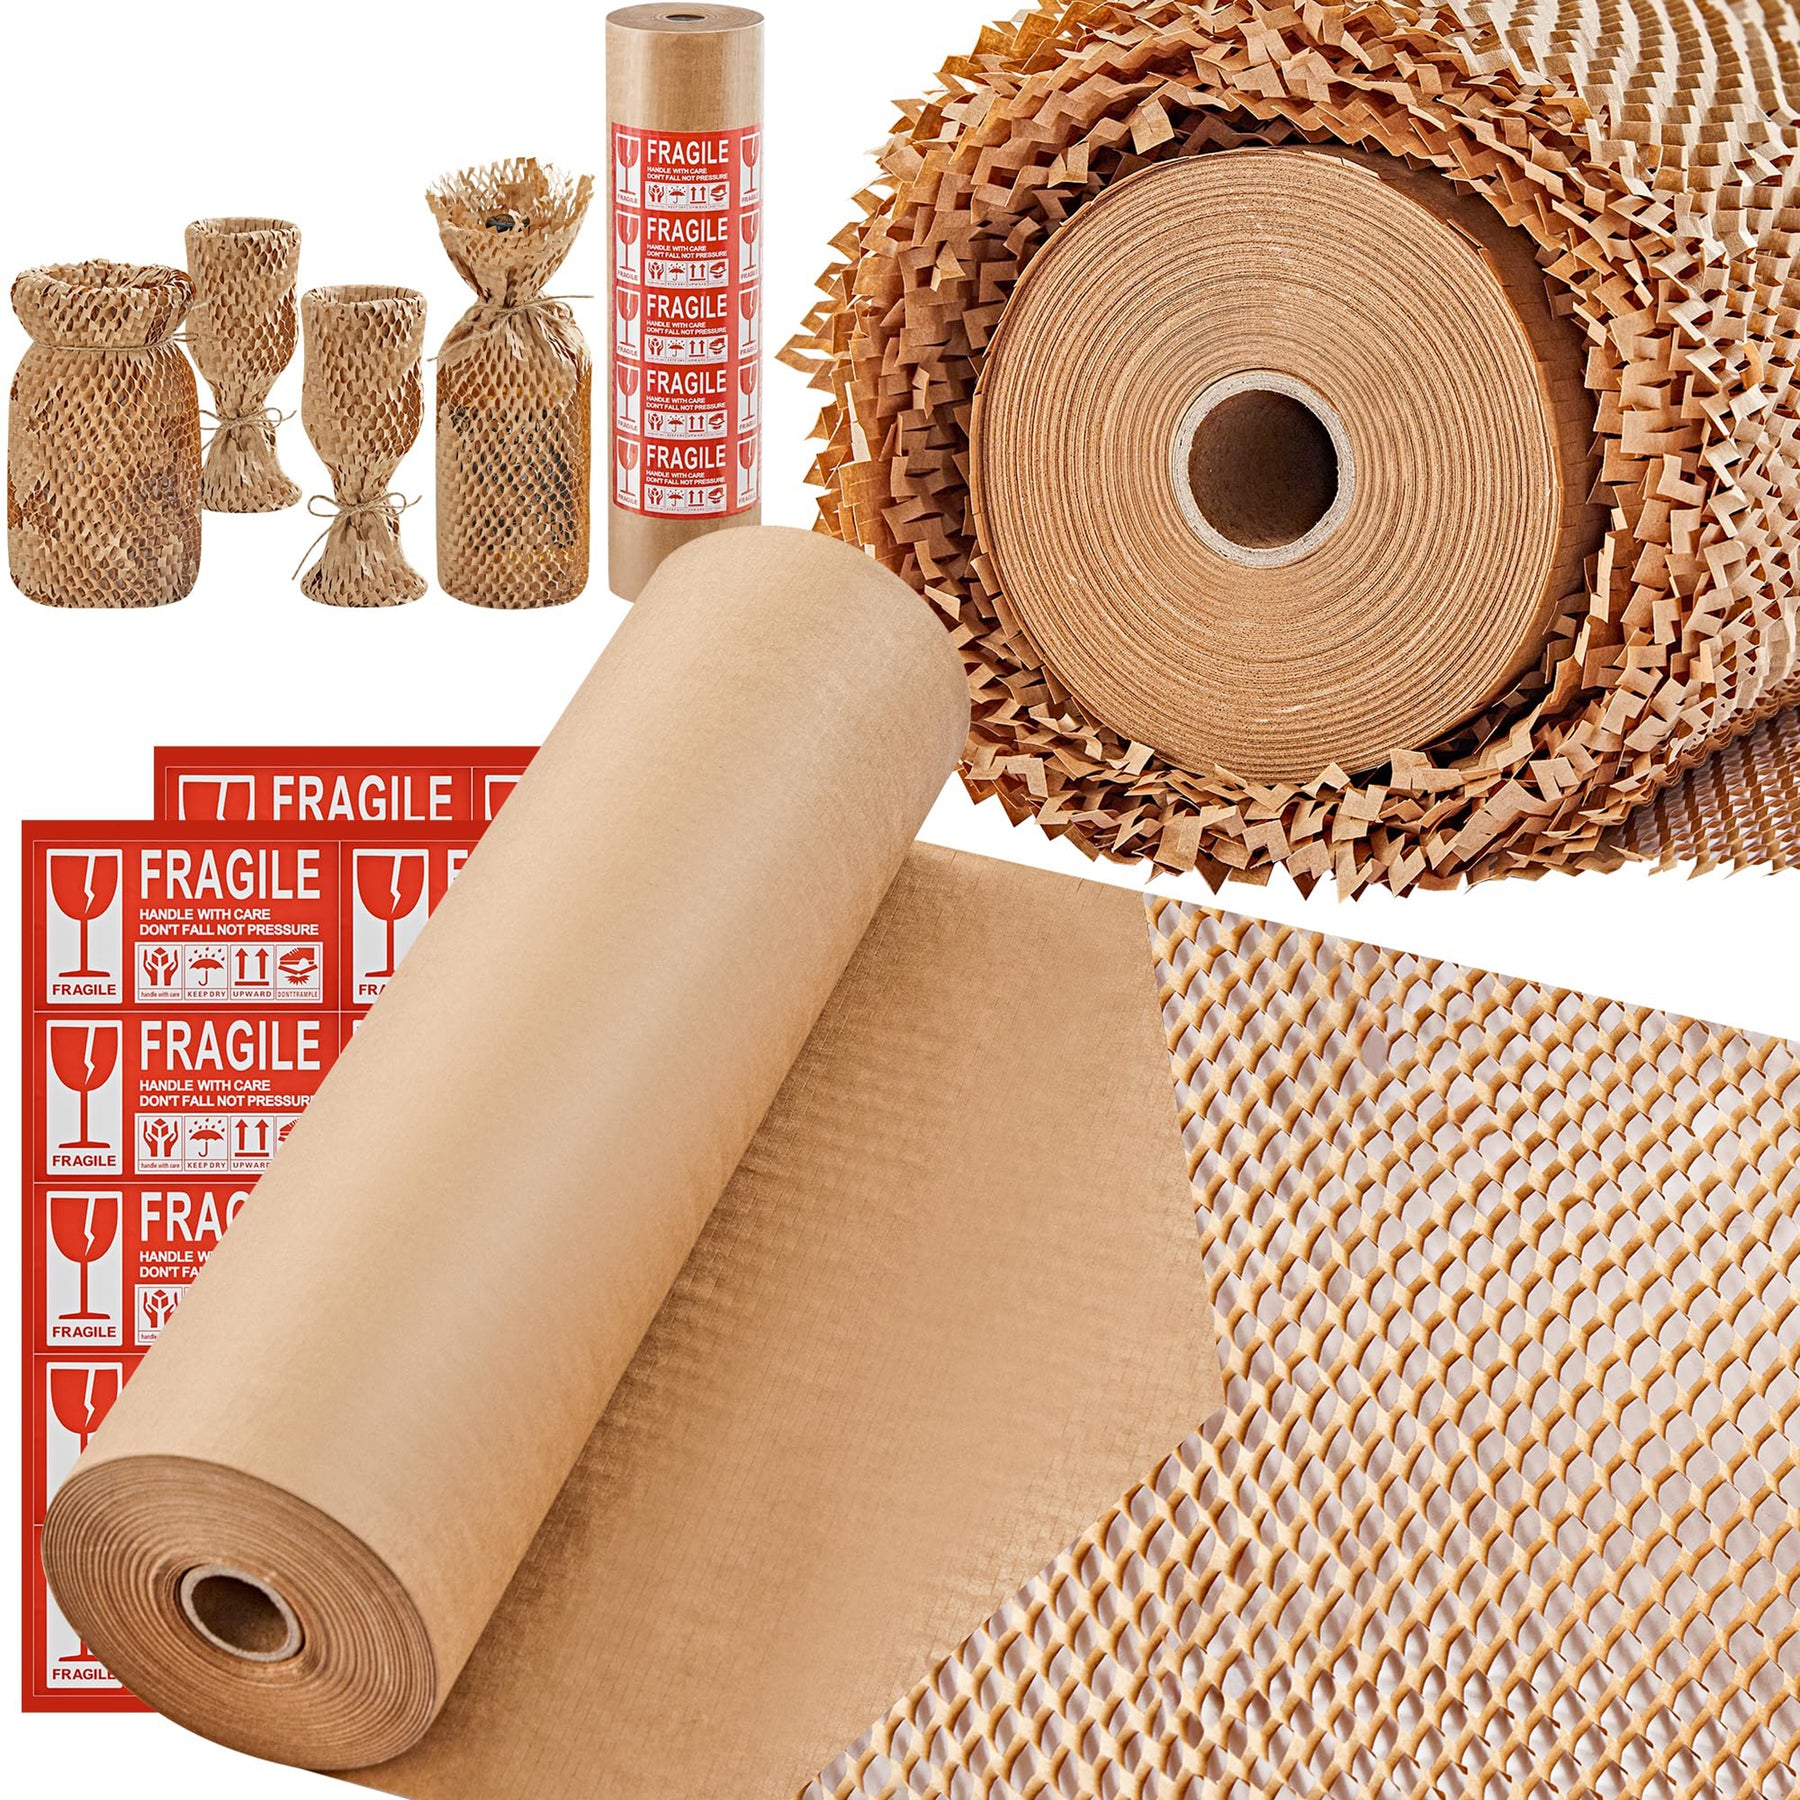 Honeycomb Packaging Paper, Packaging Paper Wrapping